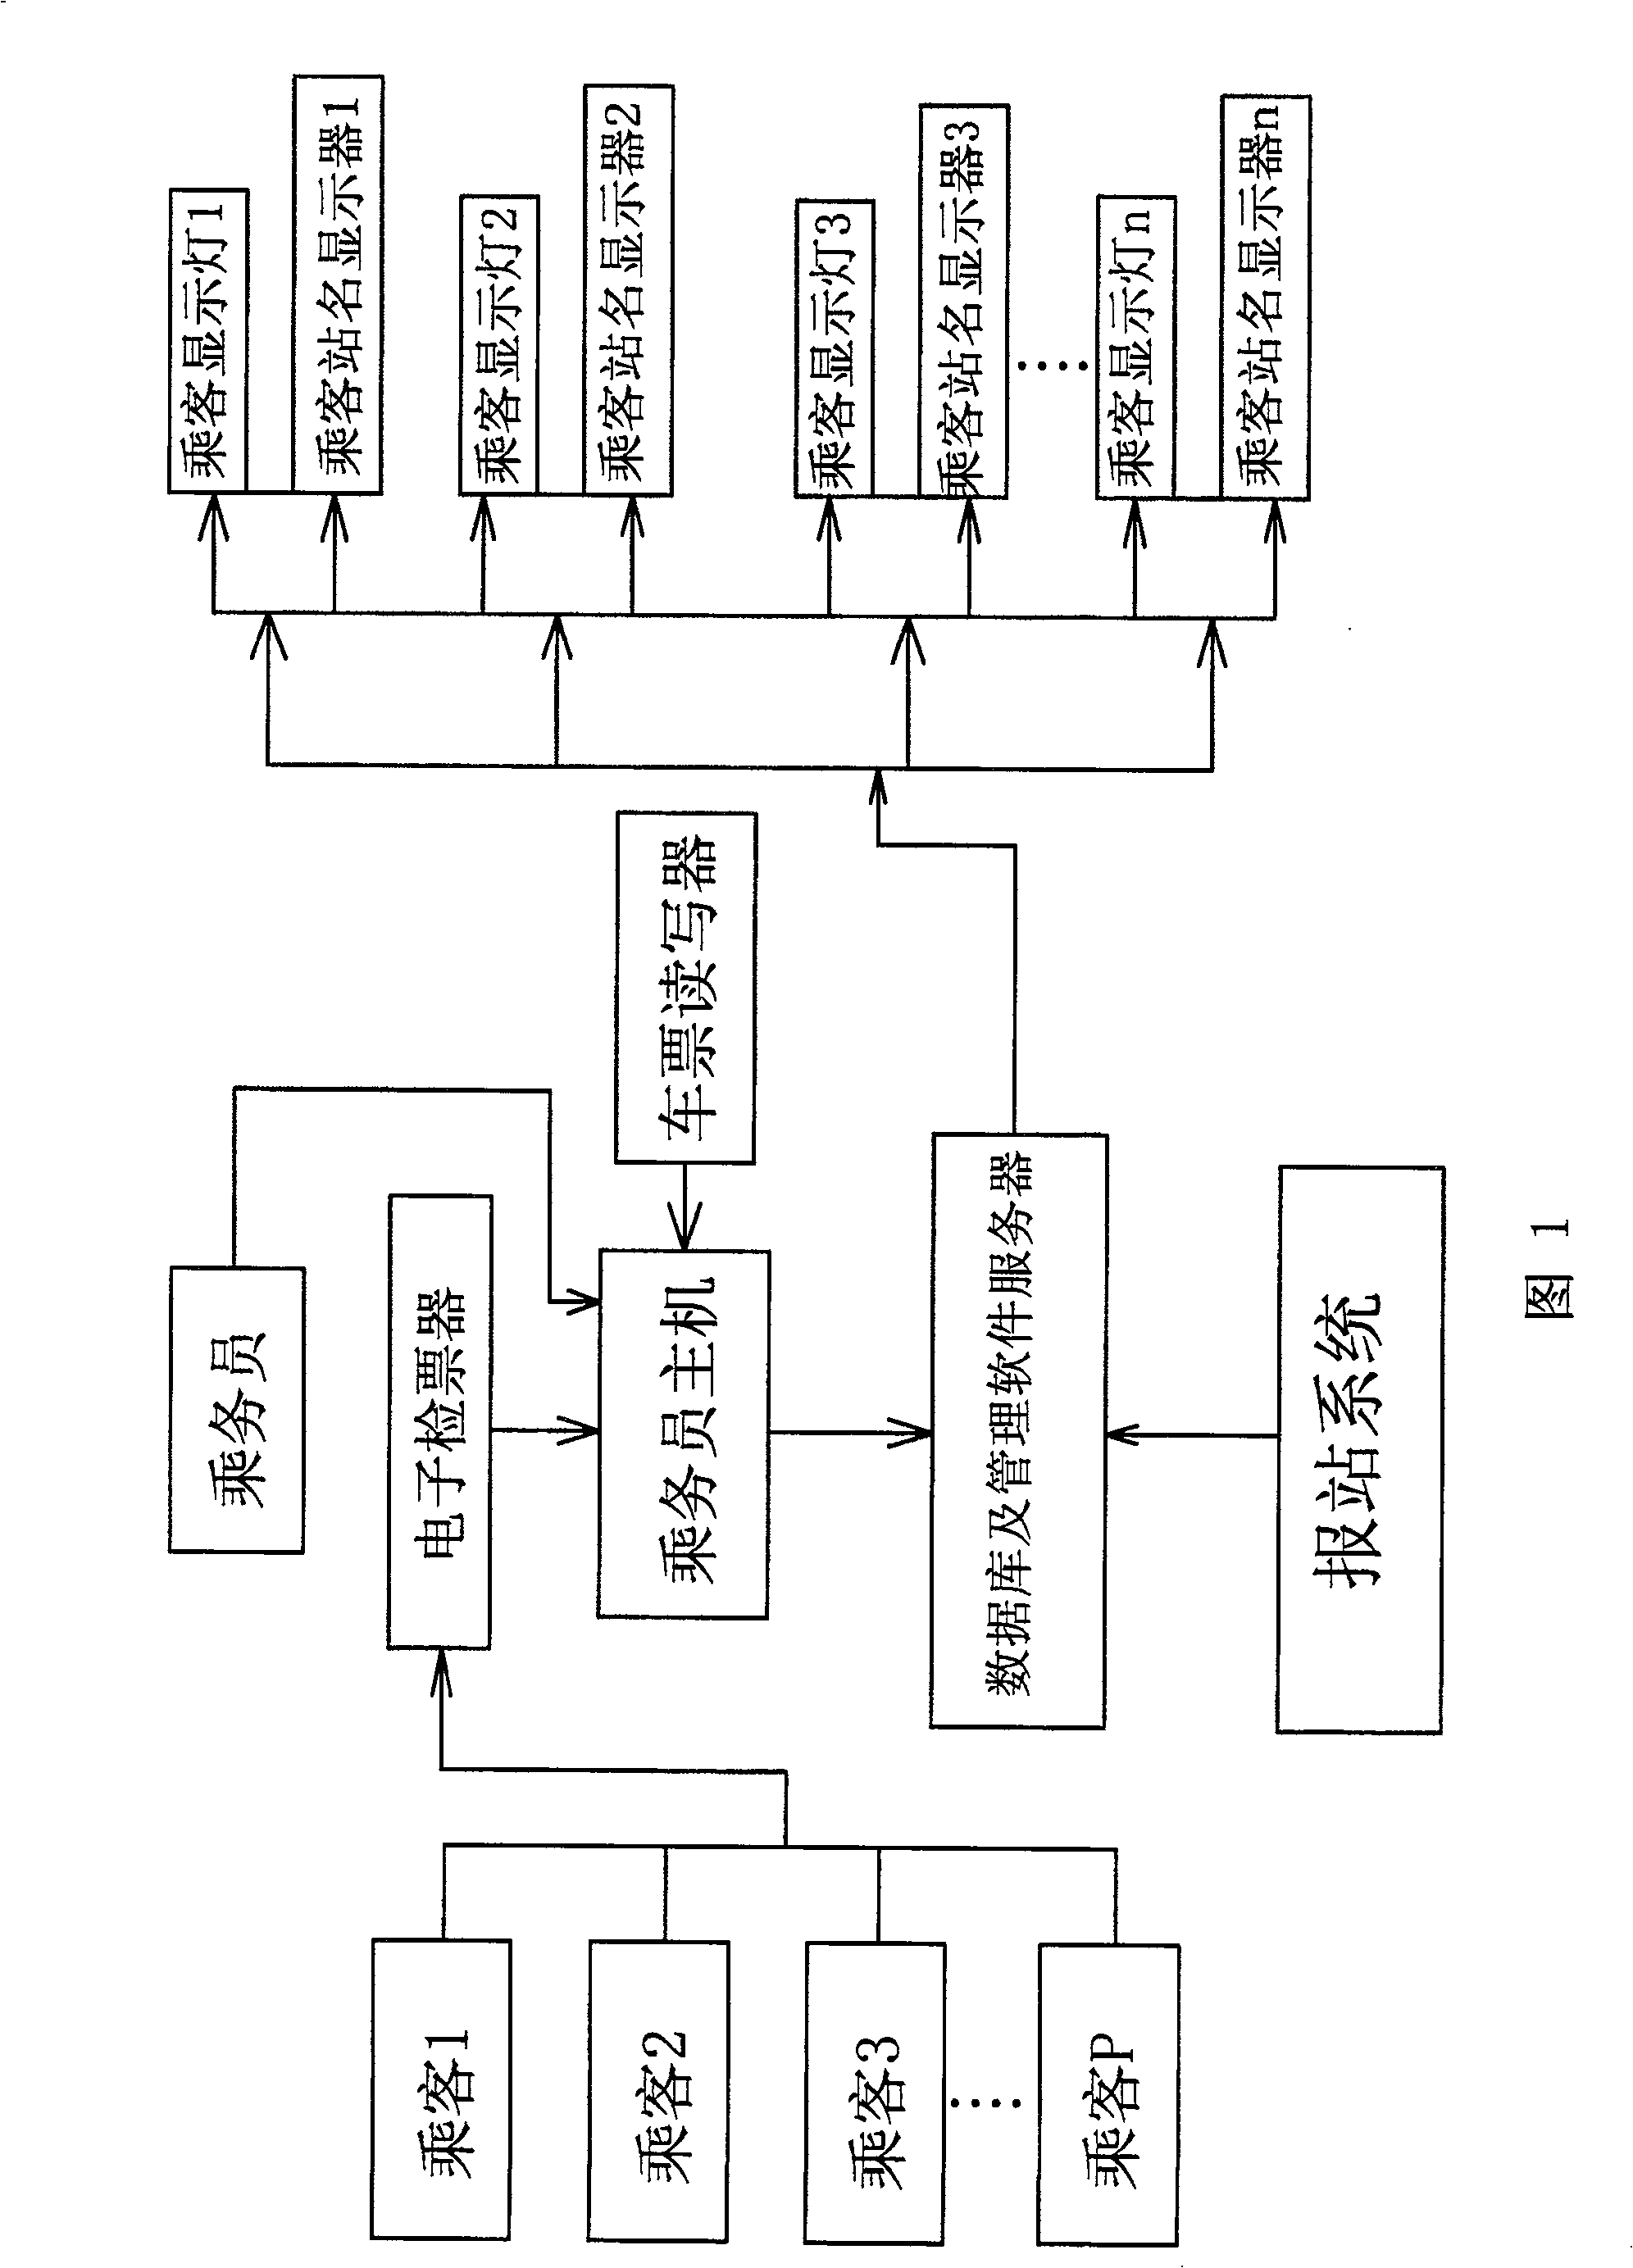 Electronic passenger management system and method used in train and coach bus